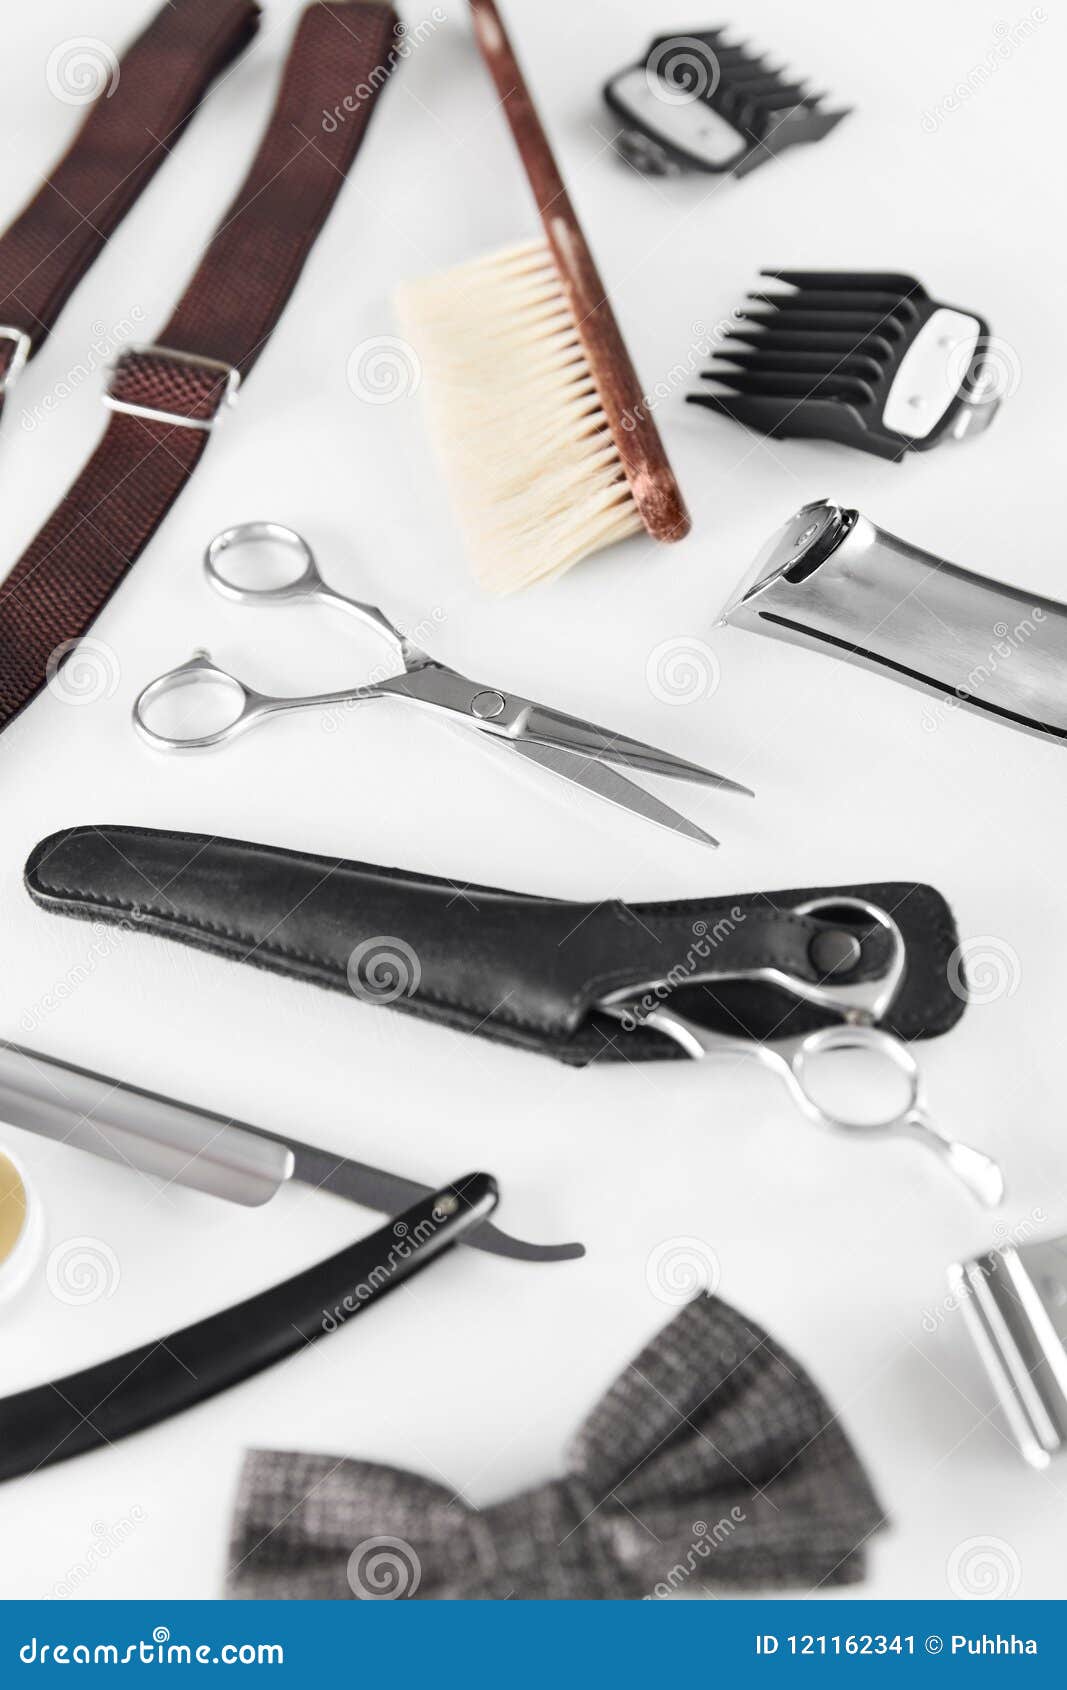 Barbershop Tools Barber Supplies And Equipment Stock Image